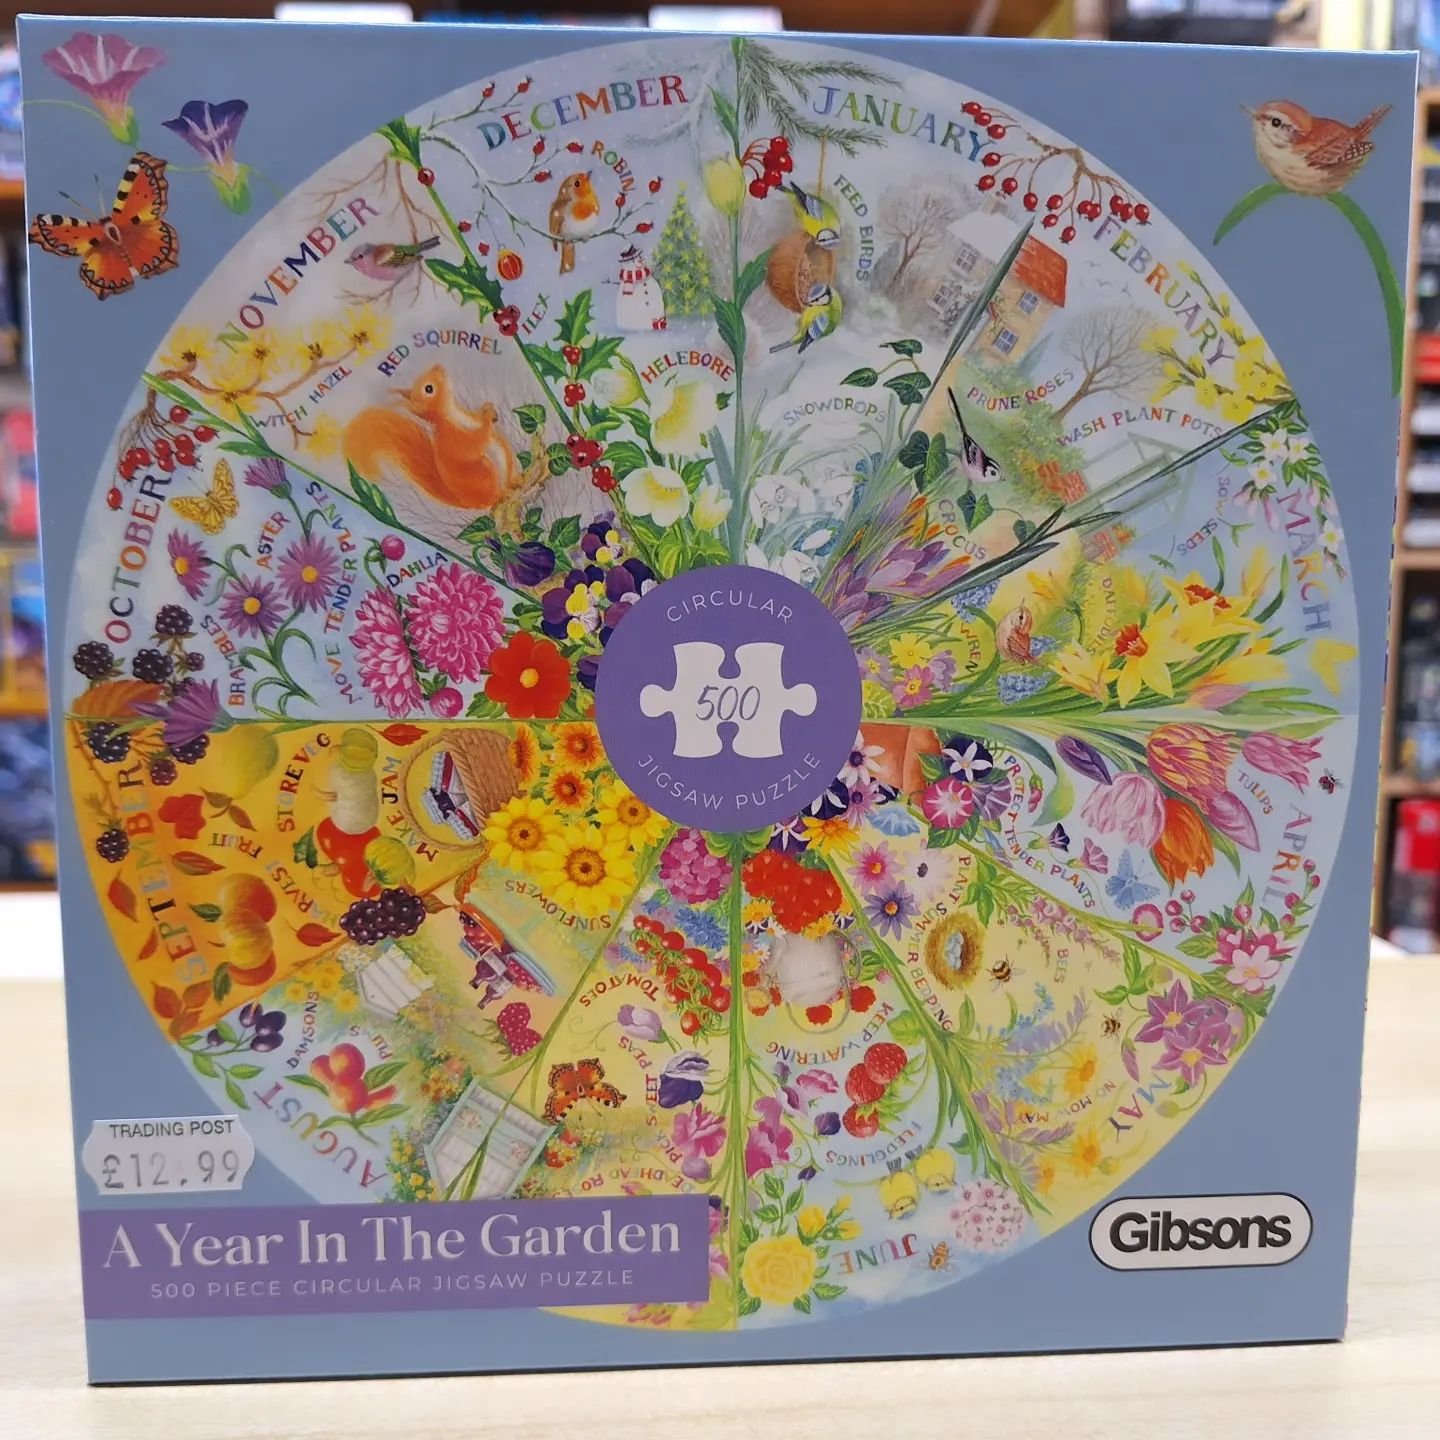 We've just added a few more jigsaws to our range.

We have jigsaws for the whole family, from 2 PIECES to 2000 PIECES!

Pop in to see our full range.🧩

#jigsaw #jigsawpuzzle #toyshop #kingsbridge #salcombe #devon #lovekingsbridge #shopkingsbridge